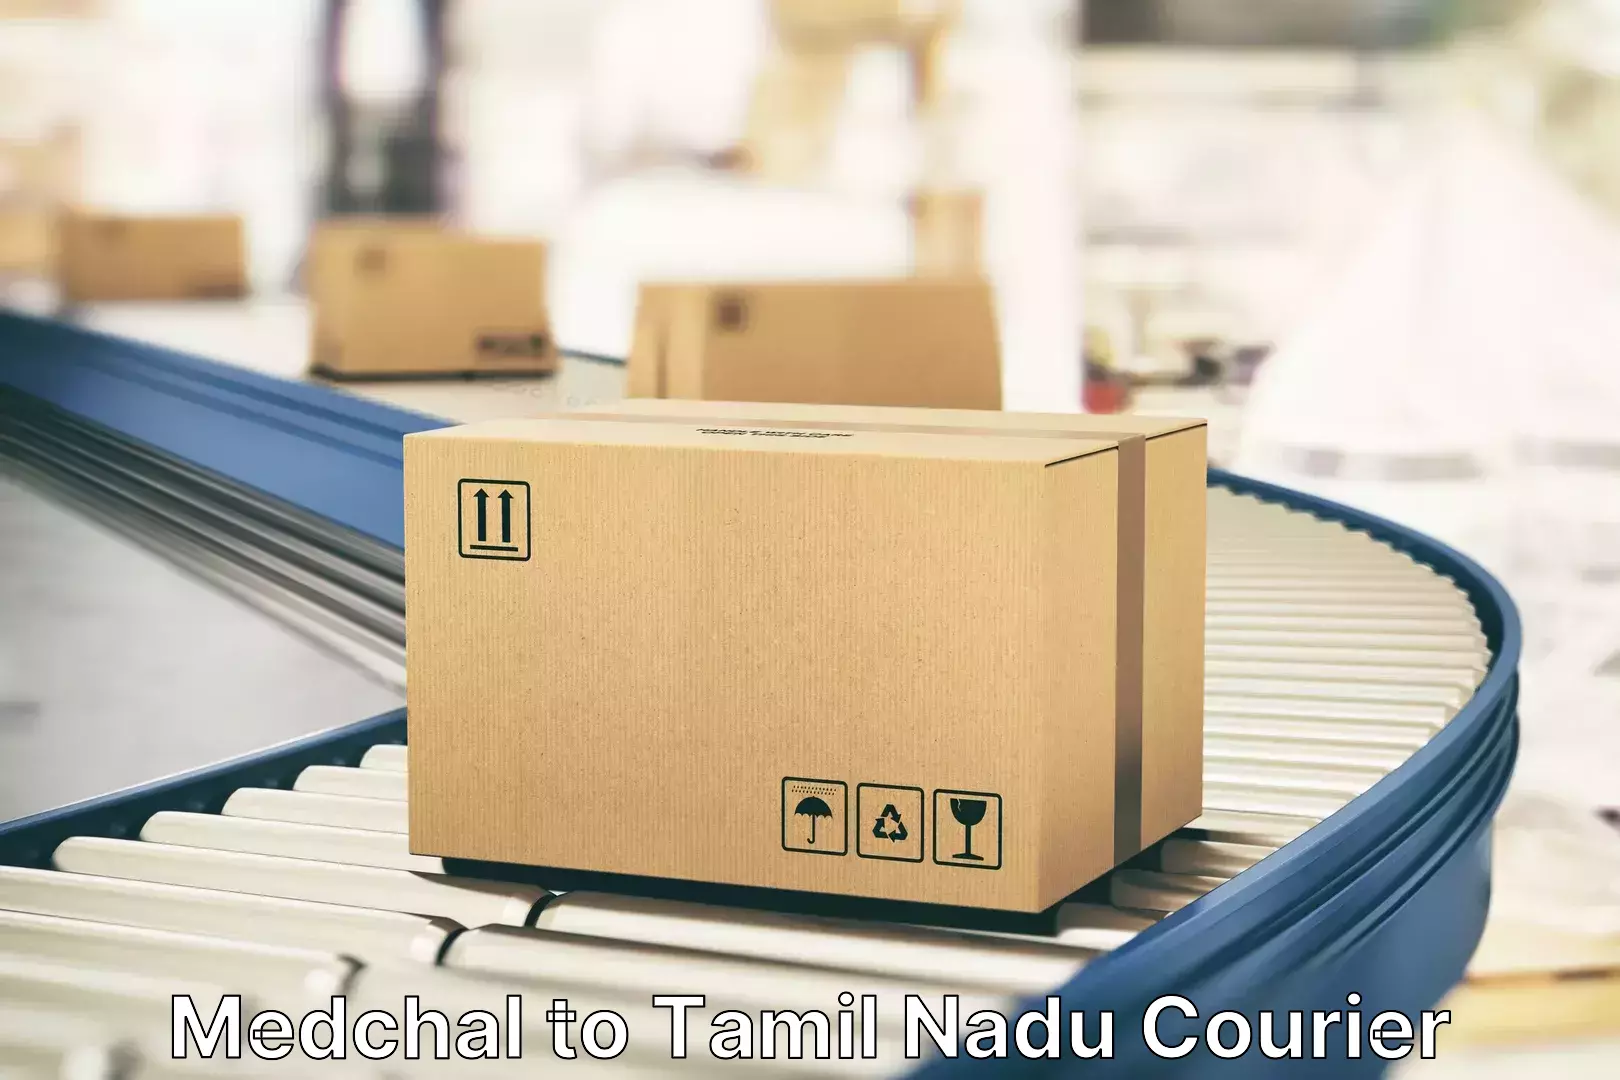 Luggage dispatch service Medchal to Tamil Nadu Veterinary and Animal Sciences University Chennai